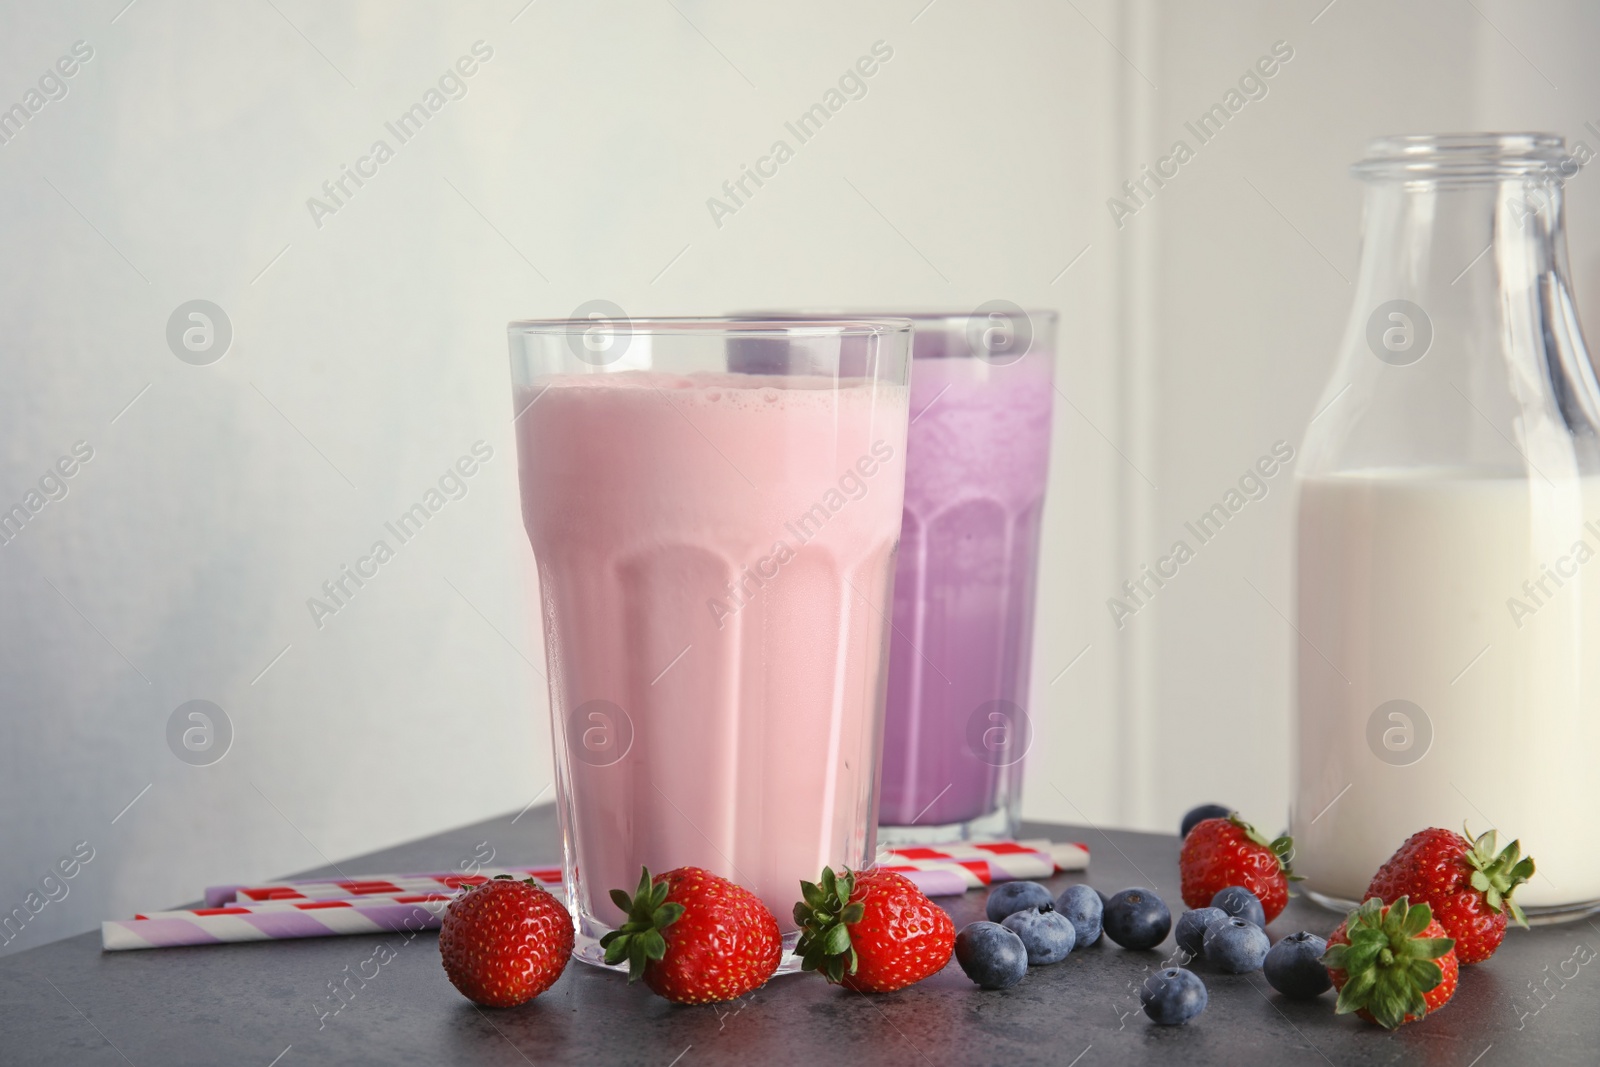 Photo of Delicious milk shakes and ingredients on table against light background